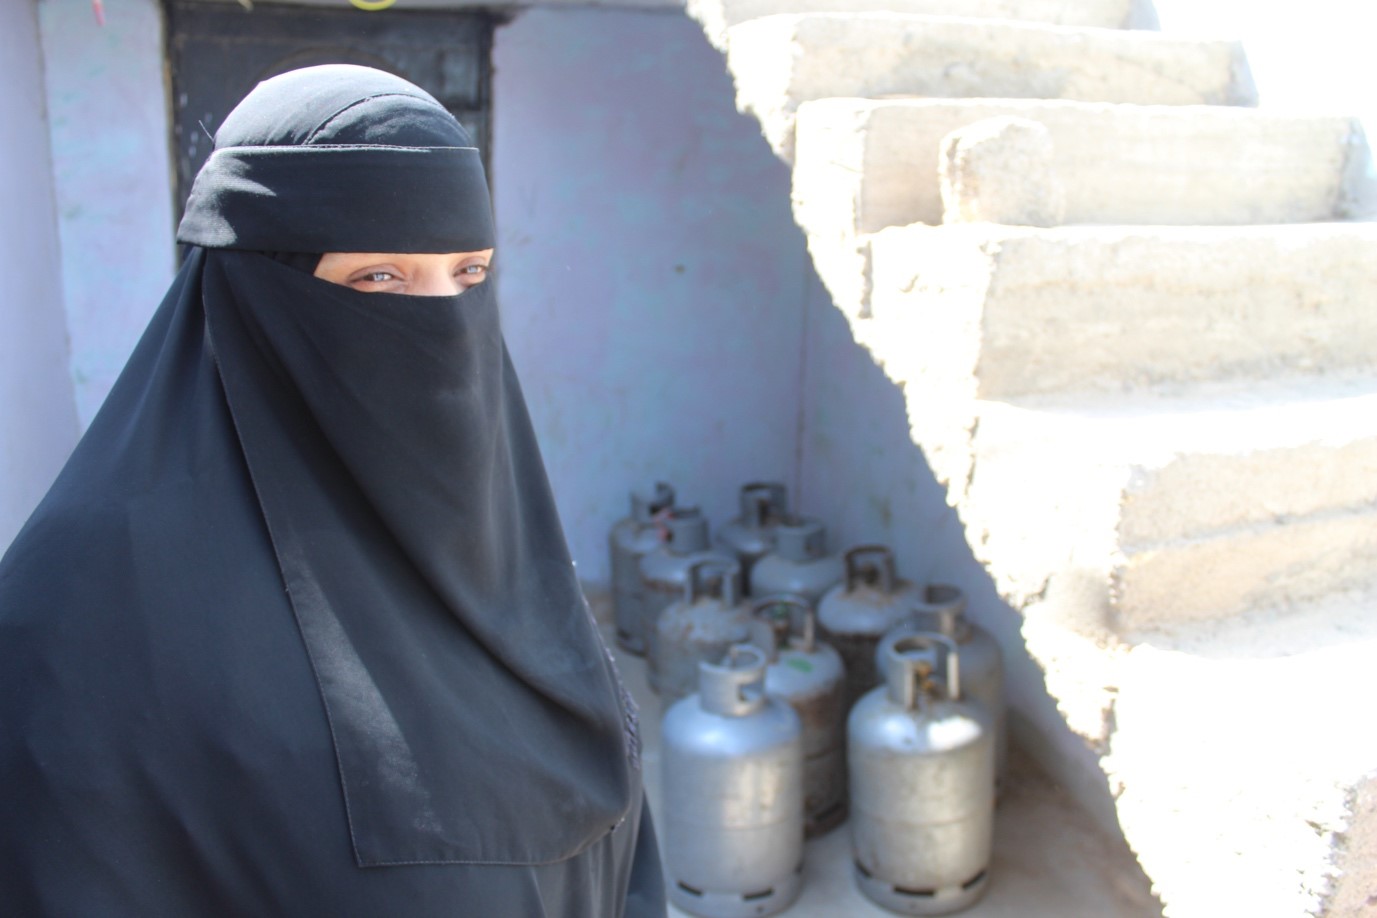 A woman in a black veil standing in front of gas cylinders.